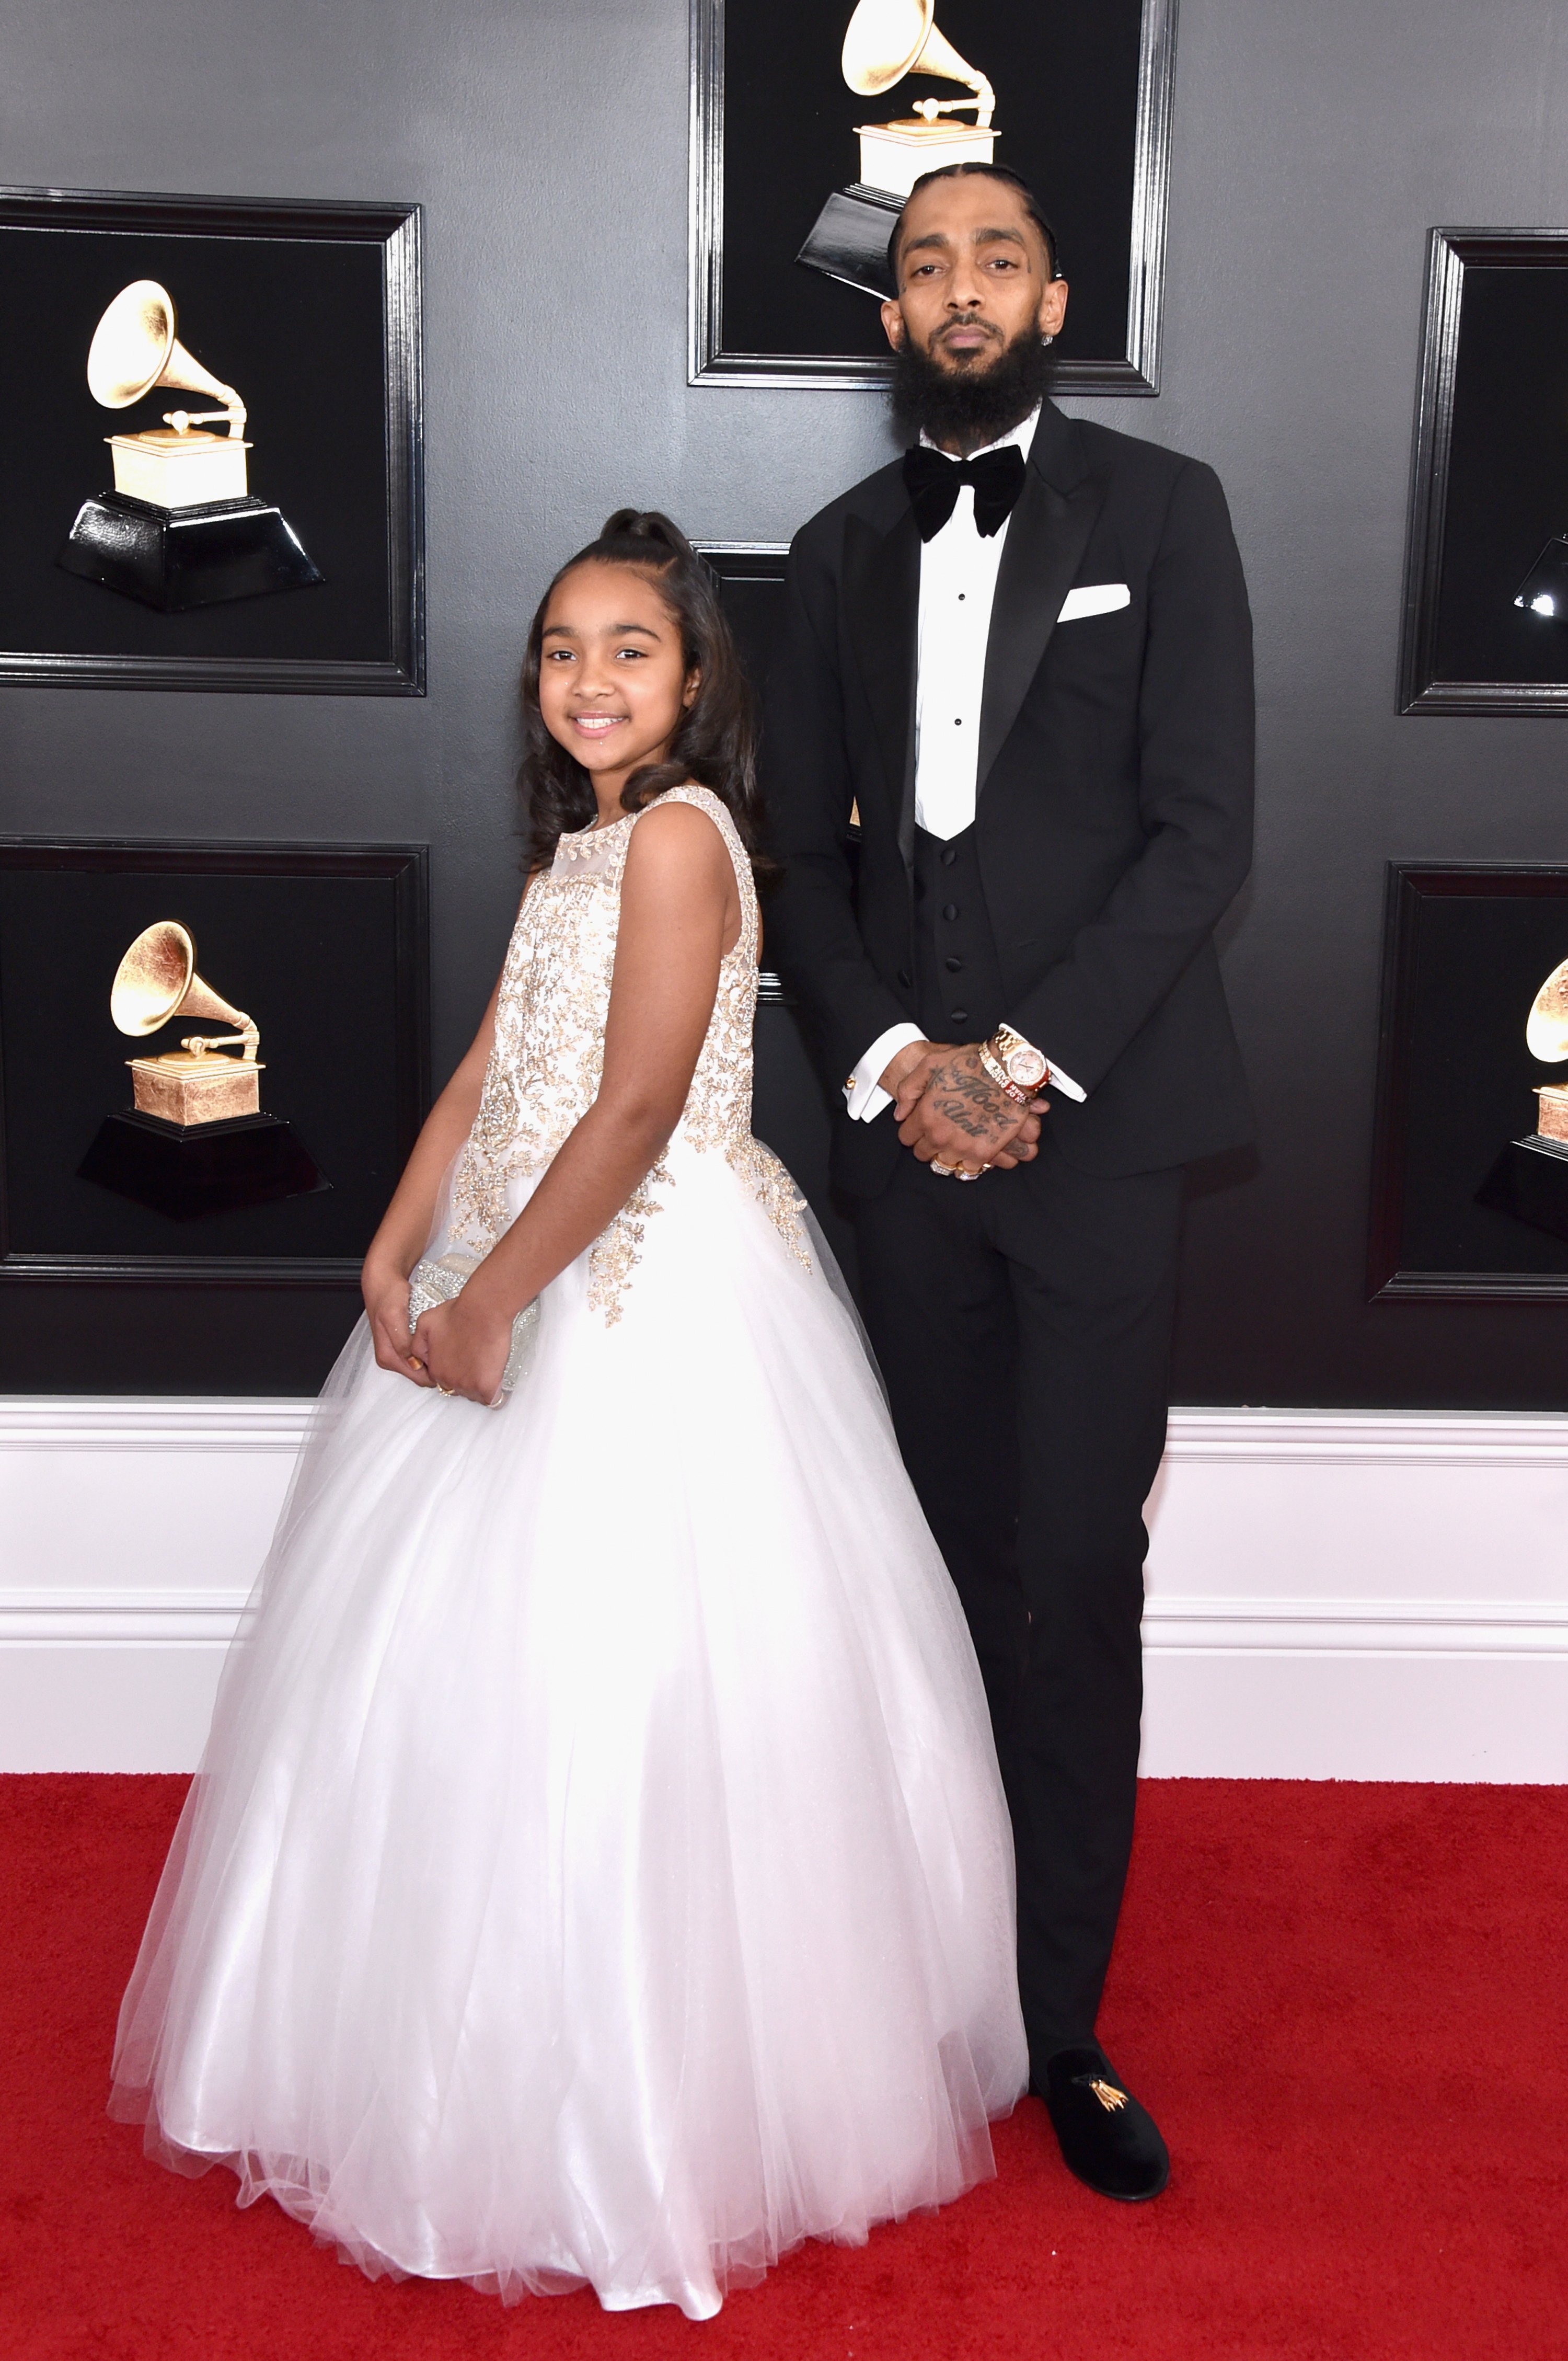 Nipsey Hussle and her daughter, Emani Asghedom attending the 61st Annual GRAMMY Awards at the Staples Center in Los Angeles on February 10, 2019. | Source: Getty 